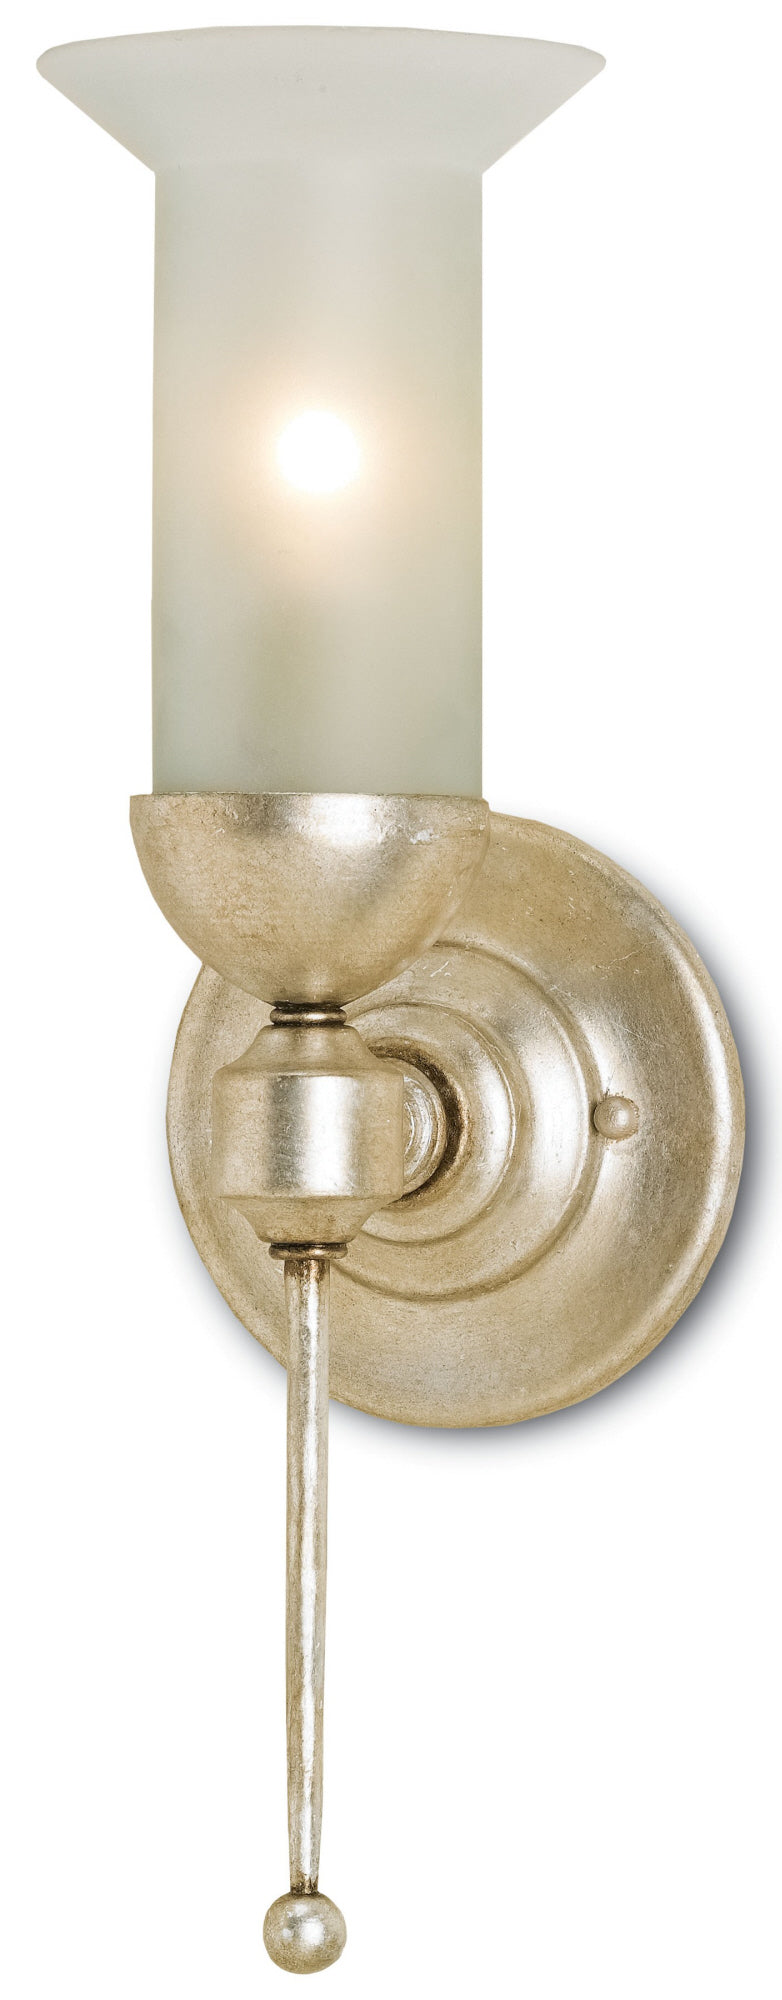 Currey and Company Pristine Wall Sconce, Silver Leaf 5117